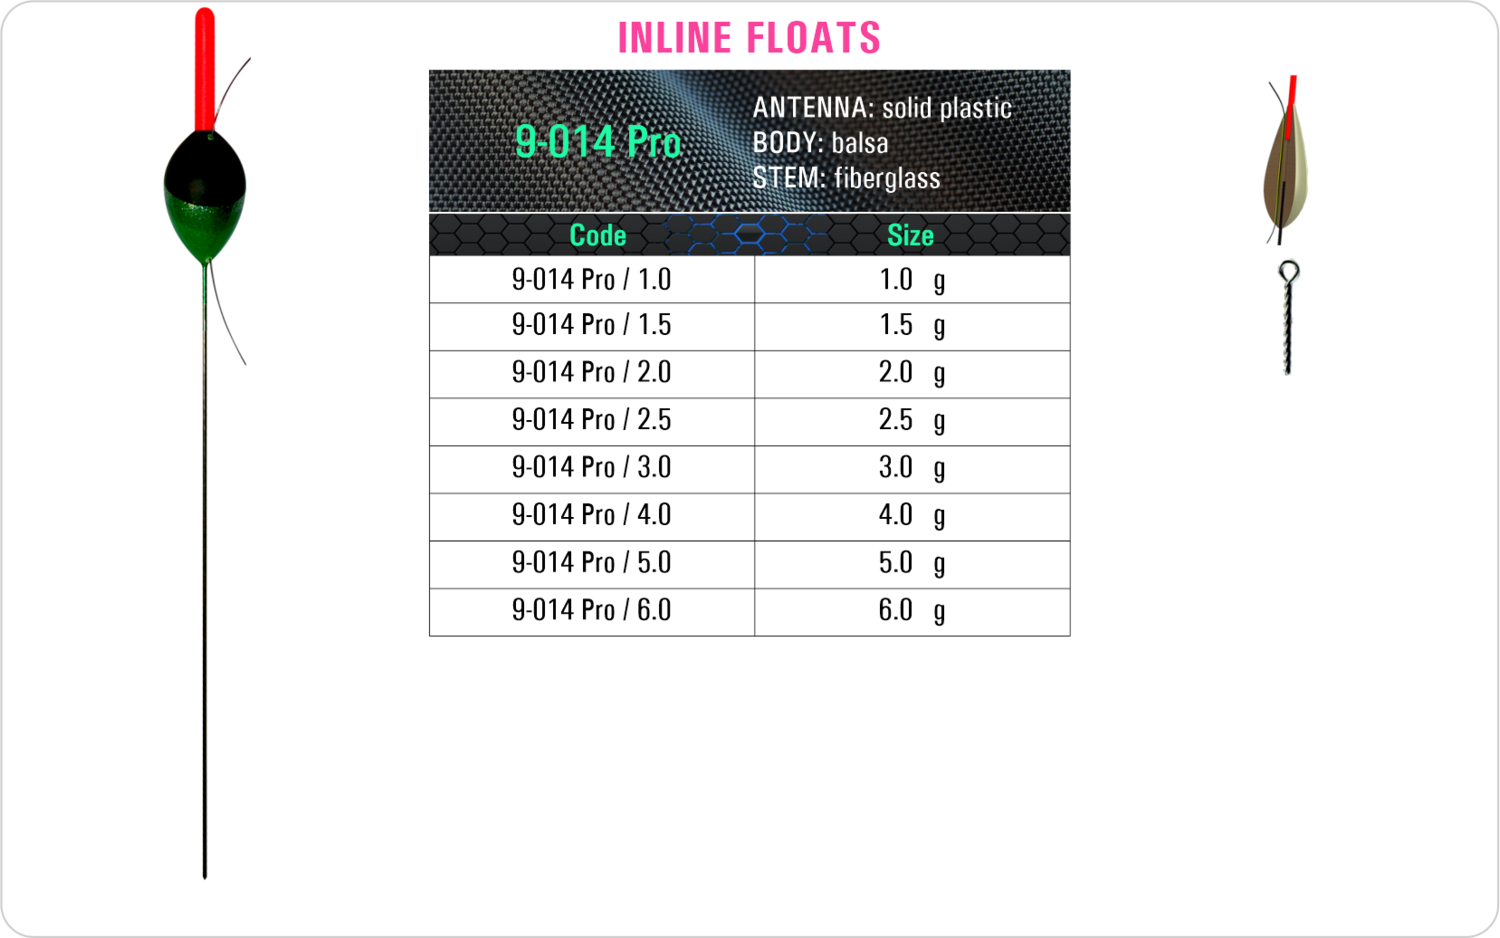 SF 9-014 Pro - Lake and river float model and table containing an additional information about this float with different codes, sizes, types of the body, the stem and the antenna of the float.